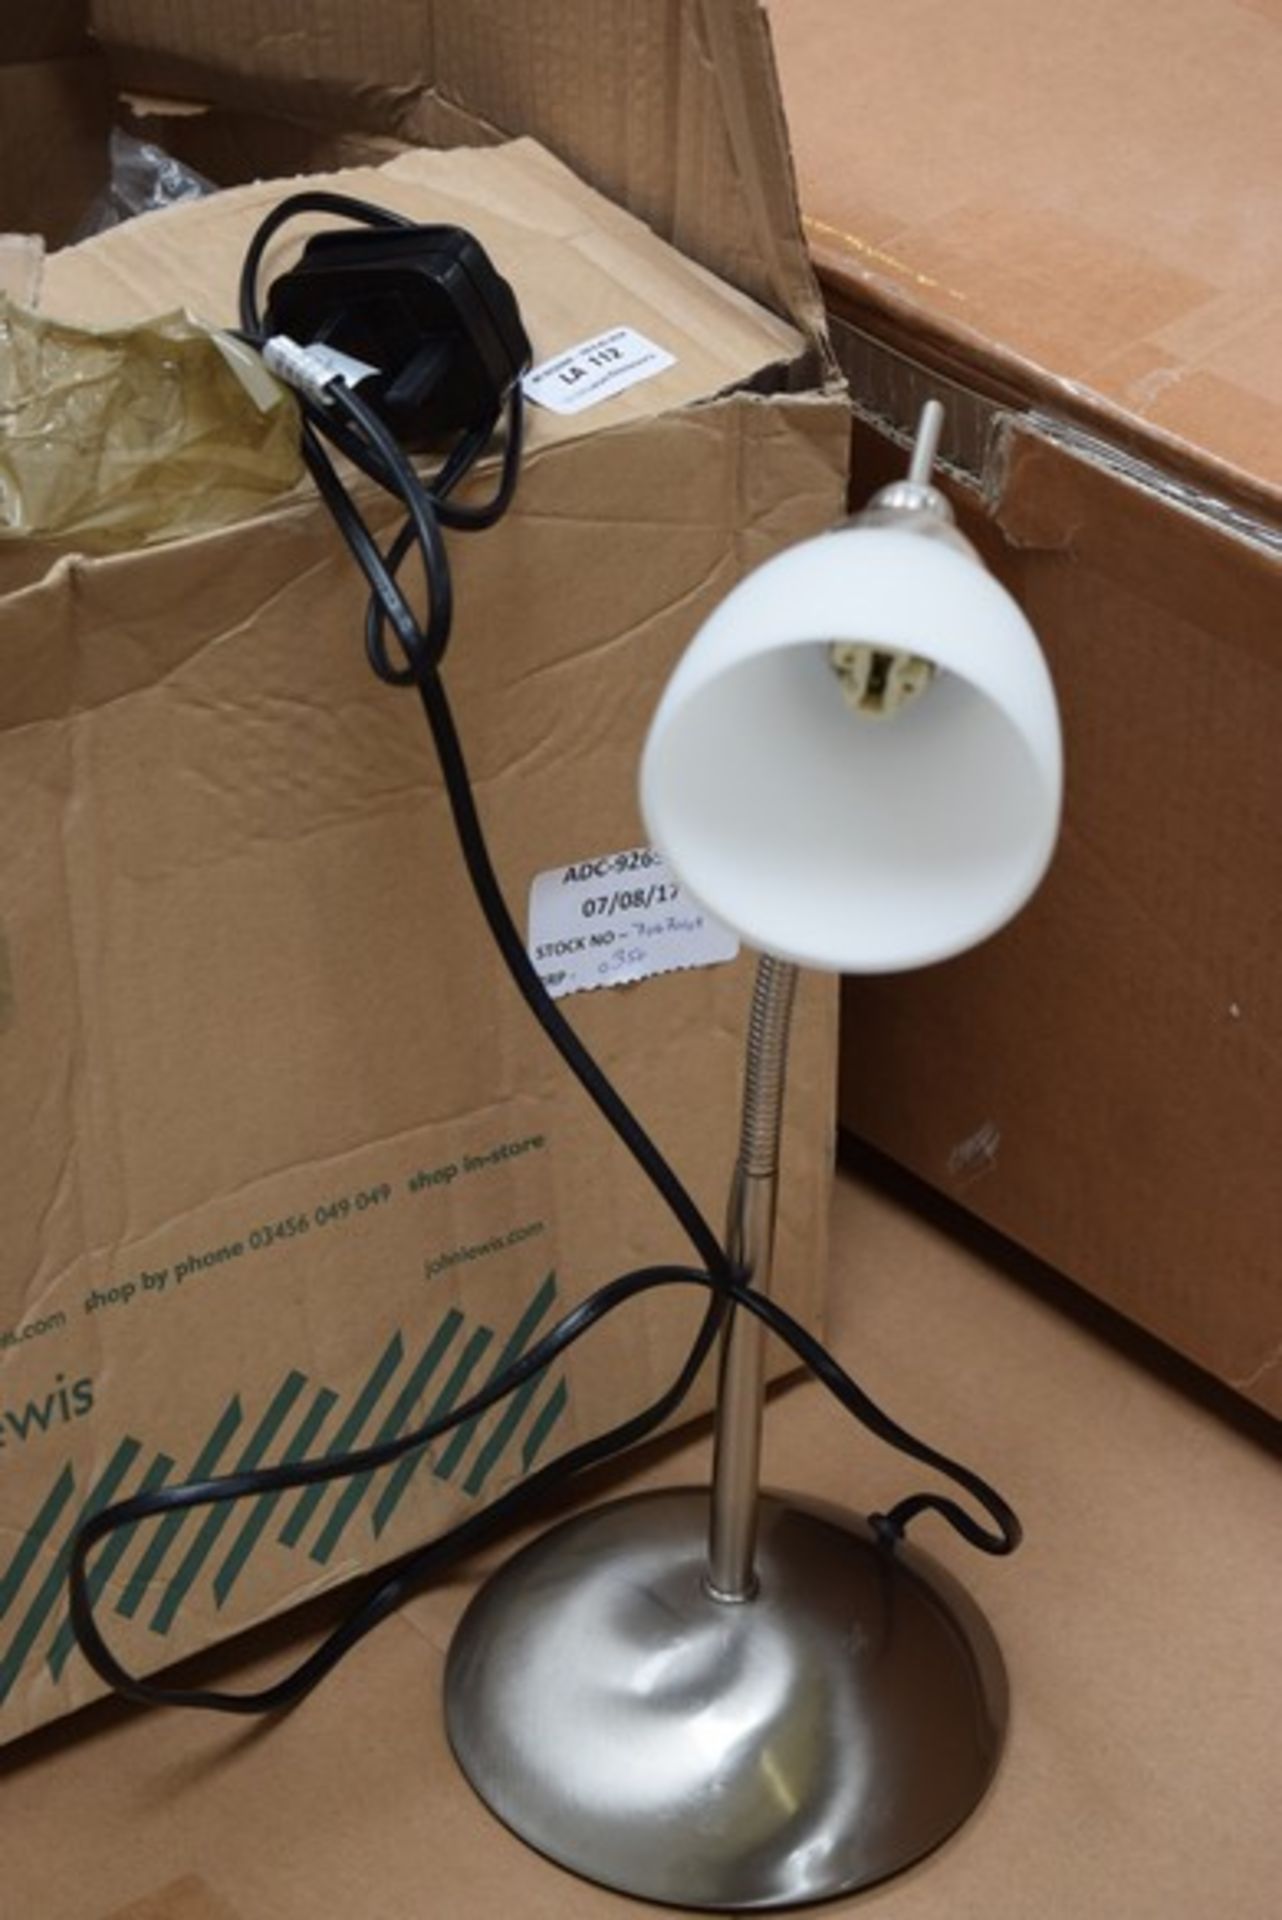 1 x CONTACT TOUCH TASK LAMP RRP £35 07.08.17 *PLEASE NOTE THAT THE BID PRICE IS MULTIPLIED BY THE